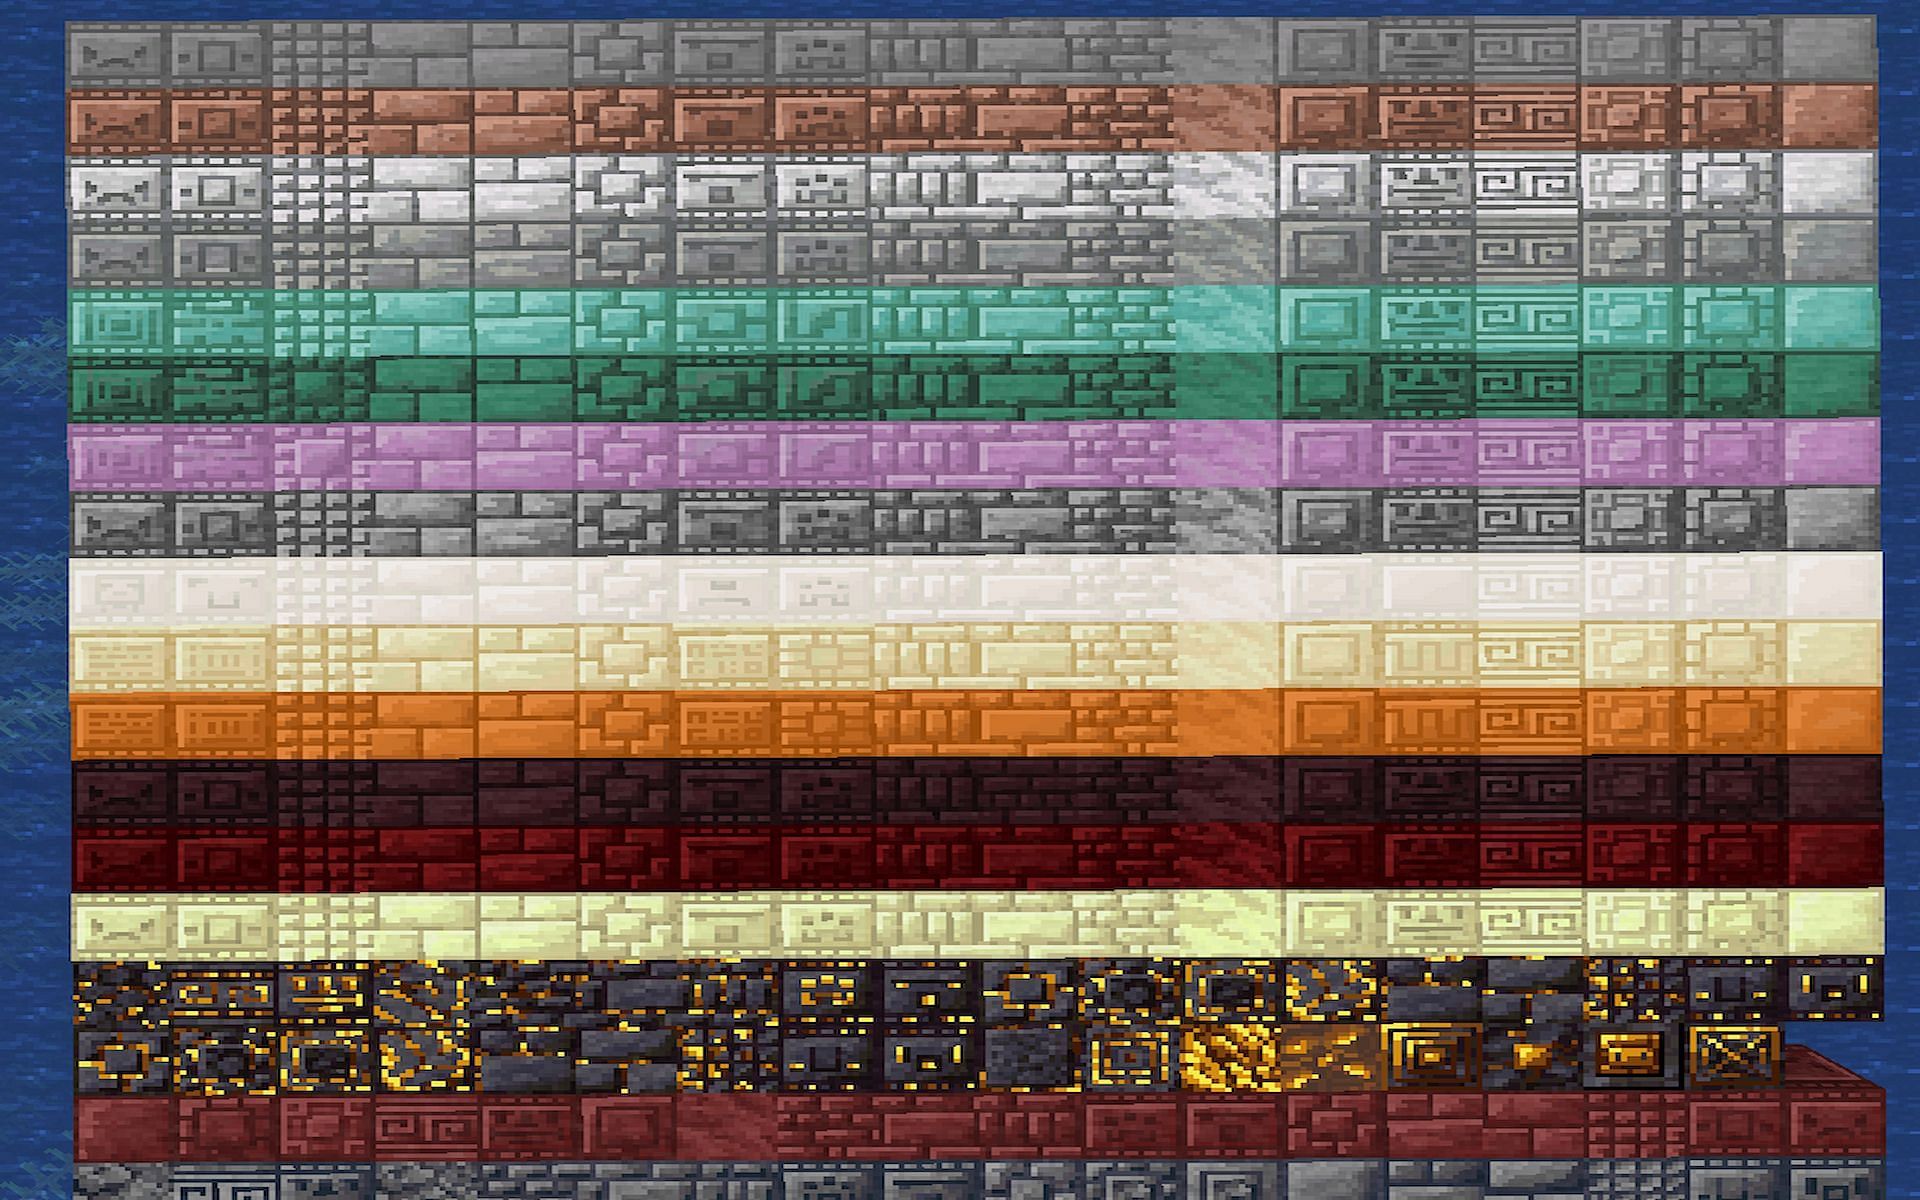 Many different colored blocks in the Chipped mod in Minecraft